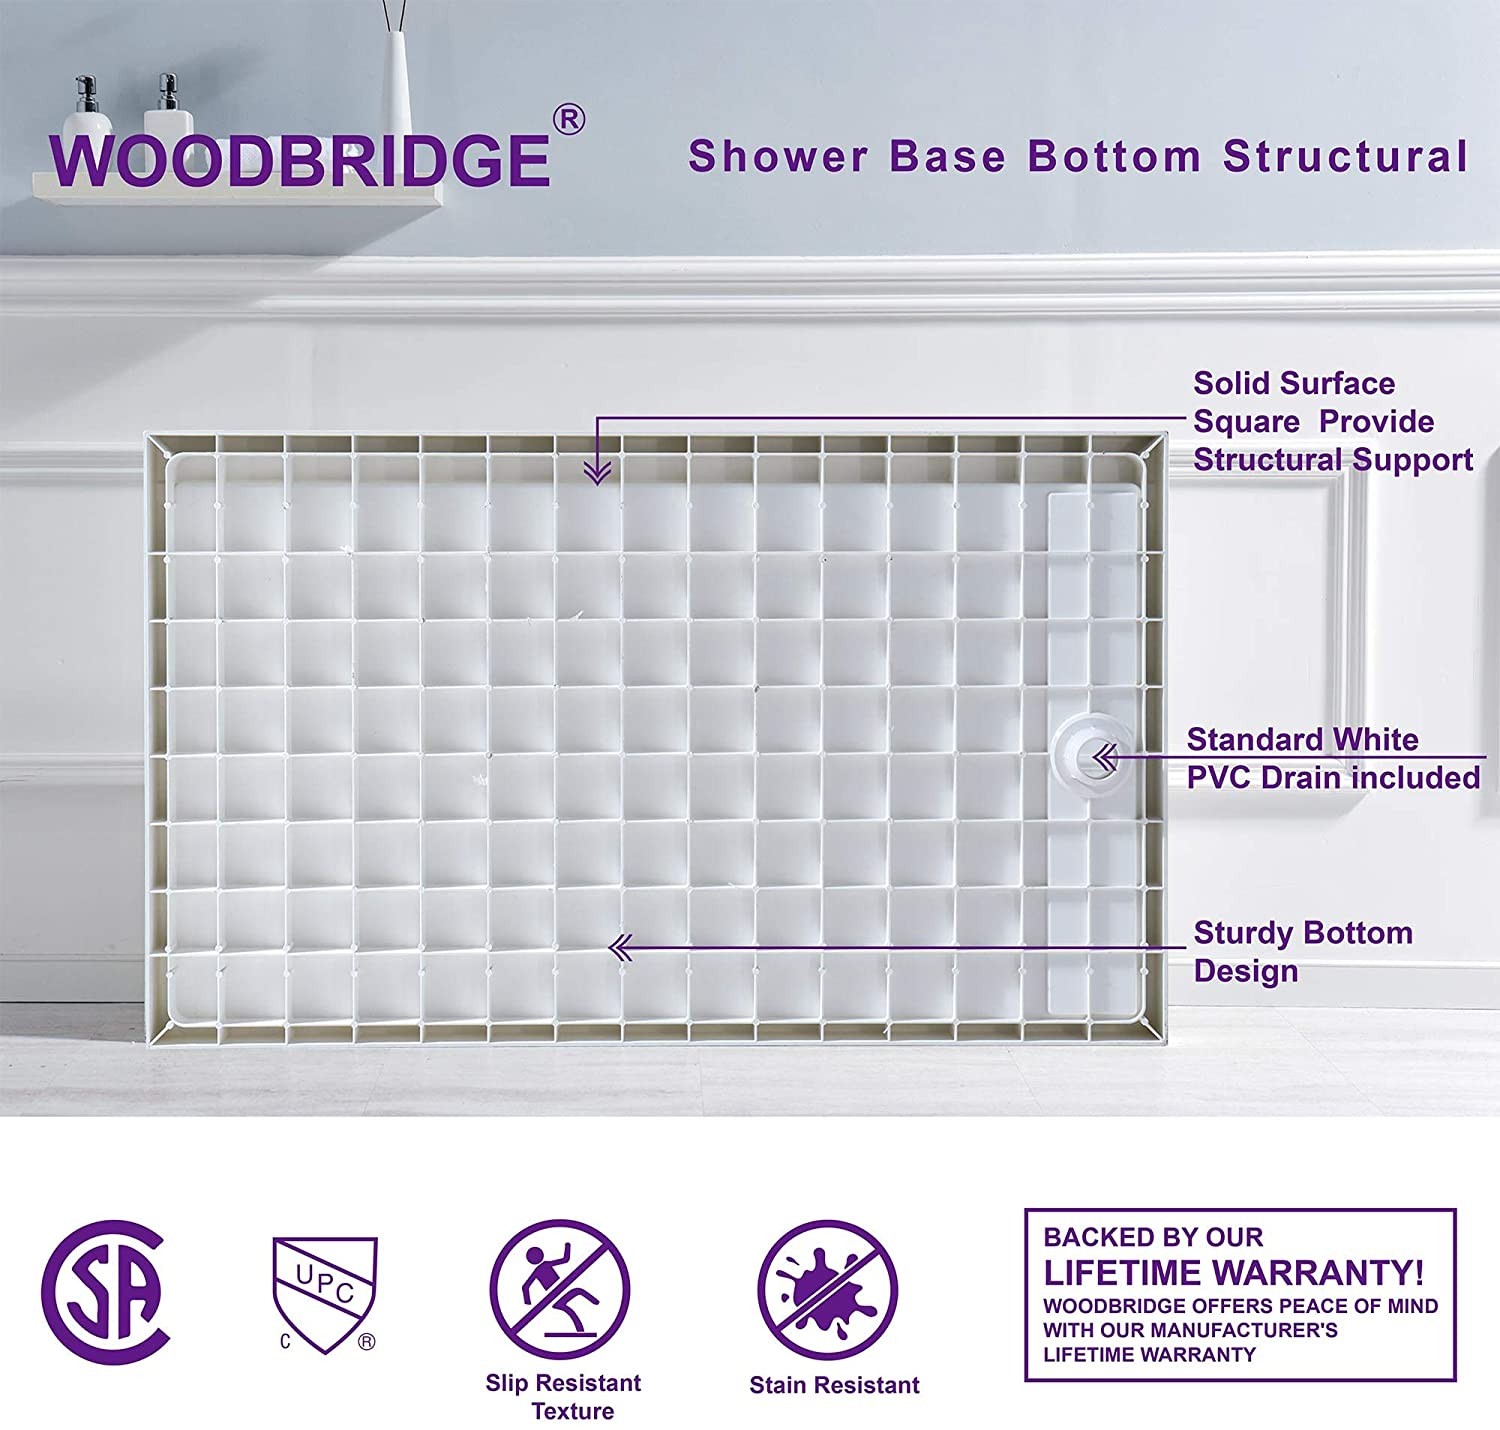  WOODBRIDGE SBR6030-1000R-CH SolidSurface Shower Base with Recessed Trench Side Including  Chrome Linear Cover, 60